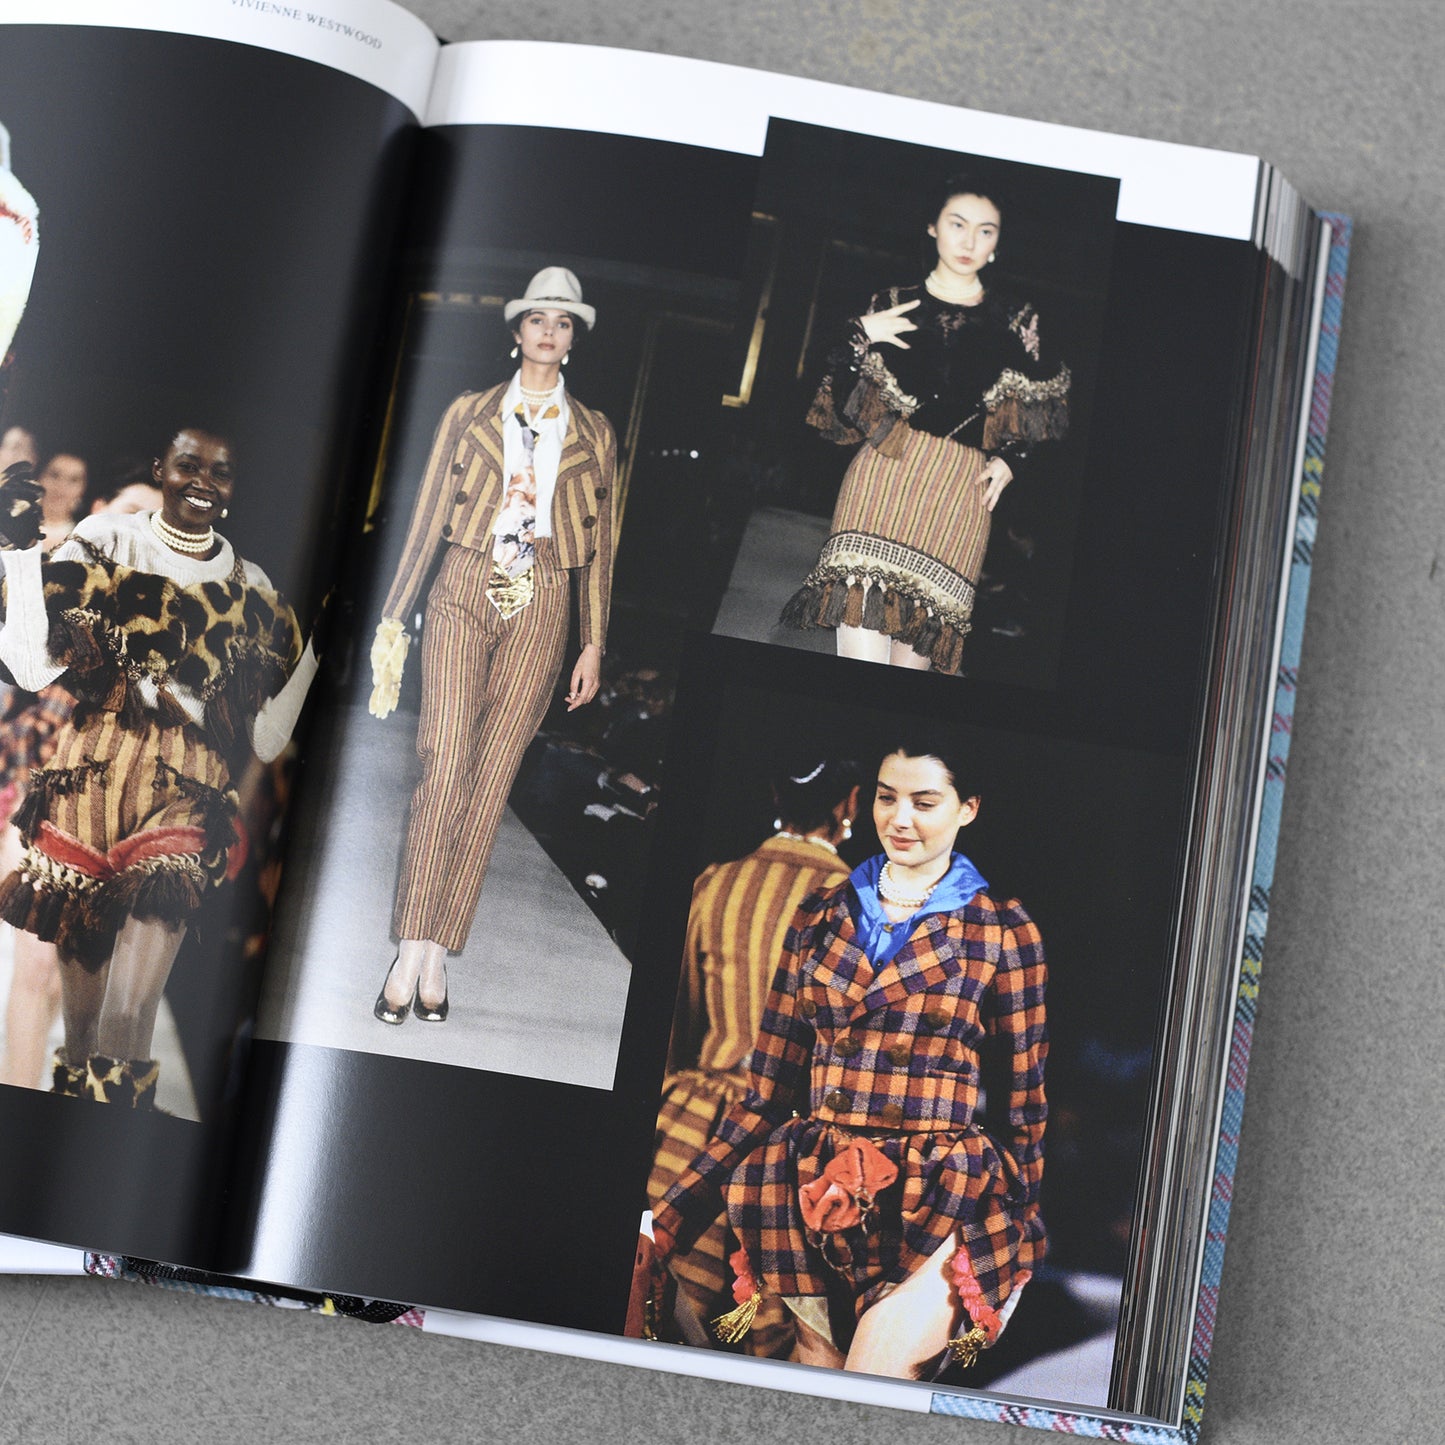 Vivienne Westwood Catwalk : The Complete Collections – Book Therapy